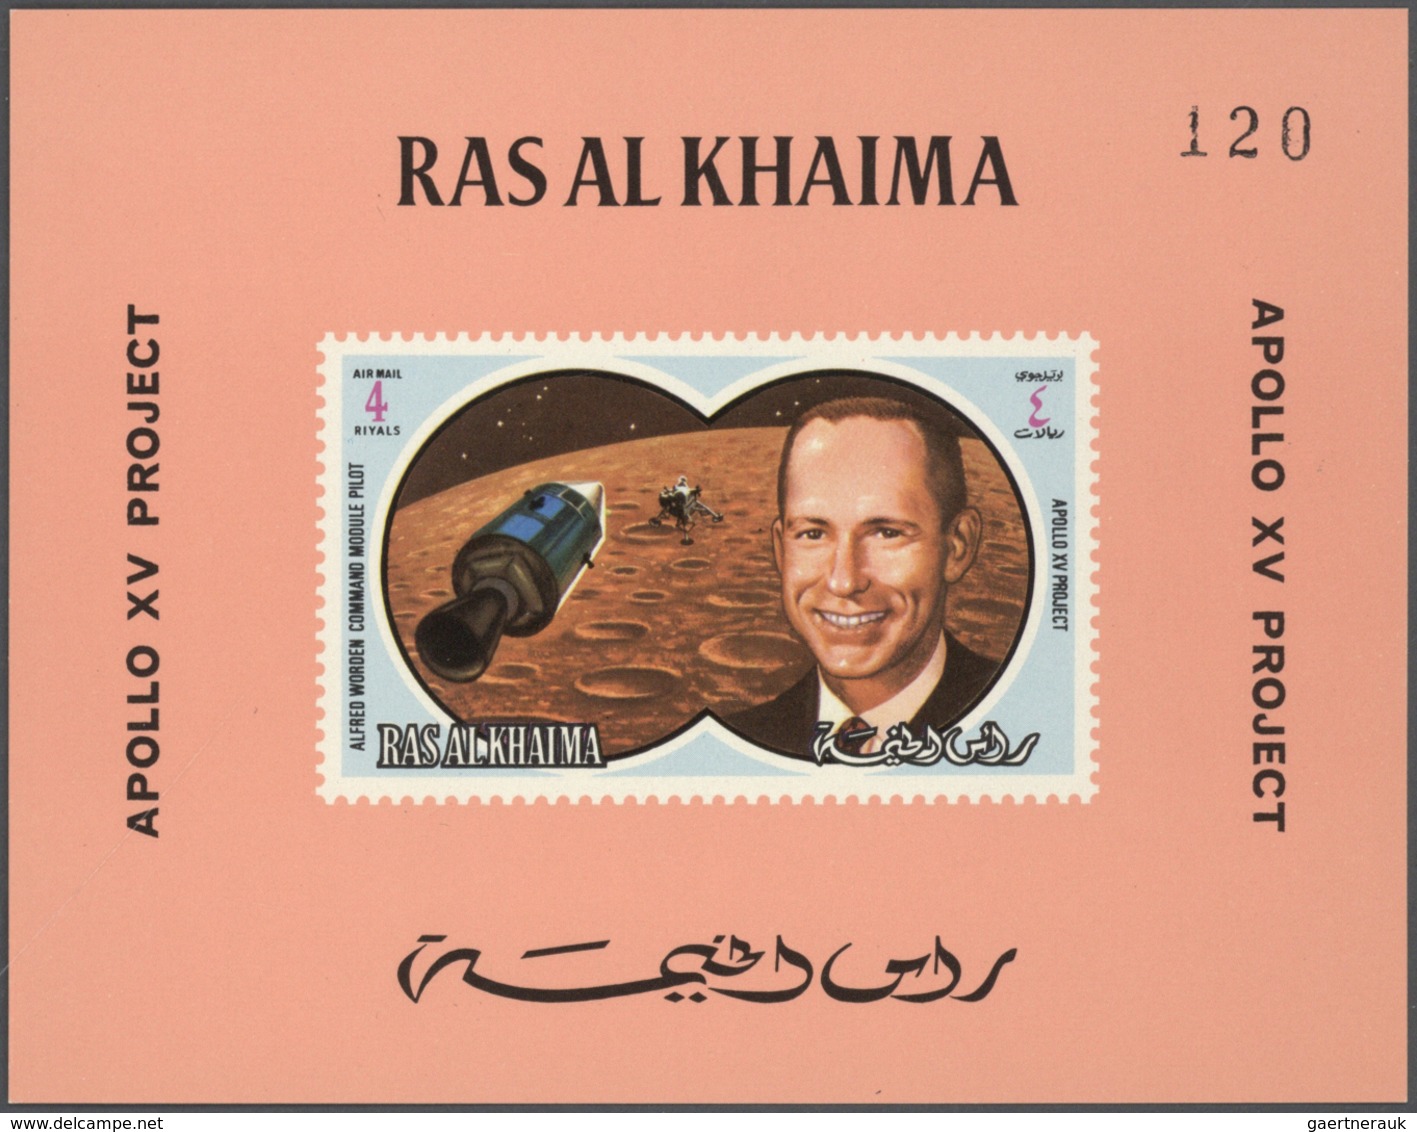 23899 Ras al Khaima: 1970/1971, u/m collection in a thick stockbook with attractive thematic issues like C